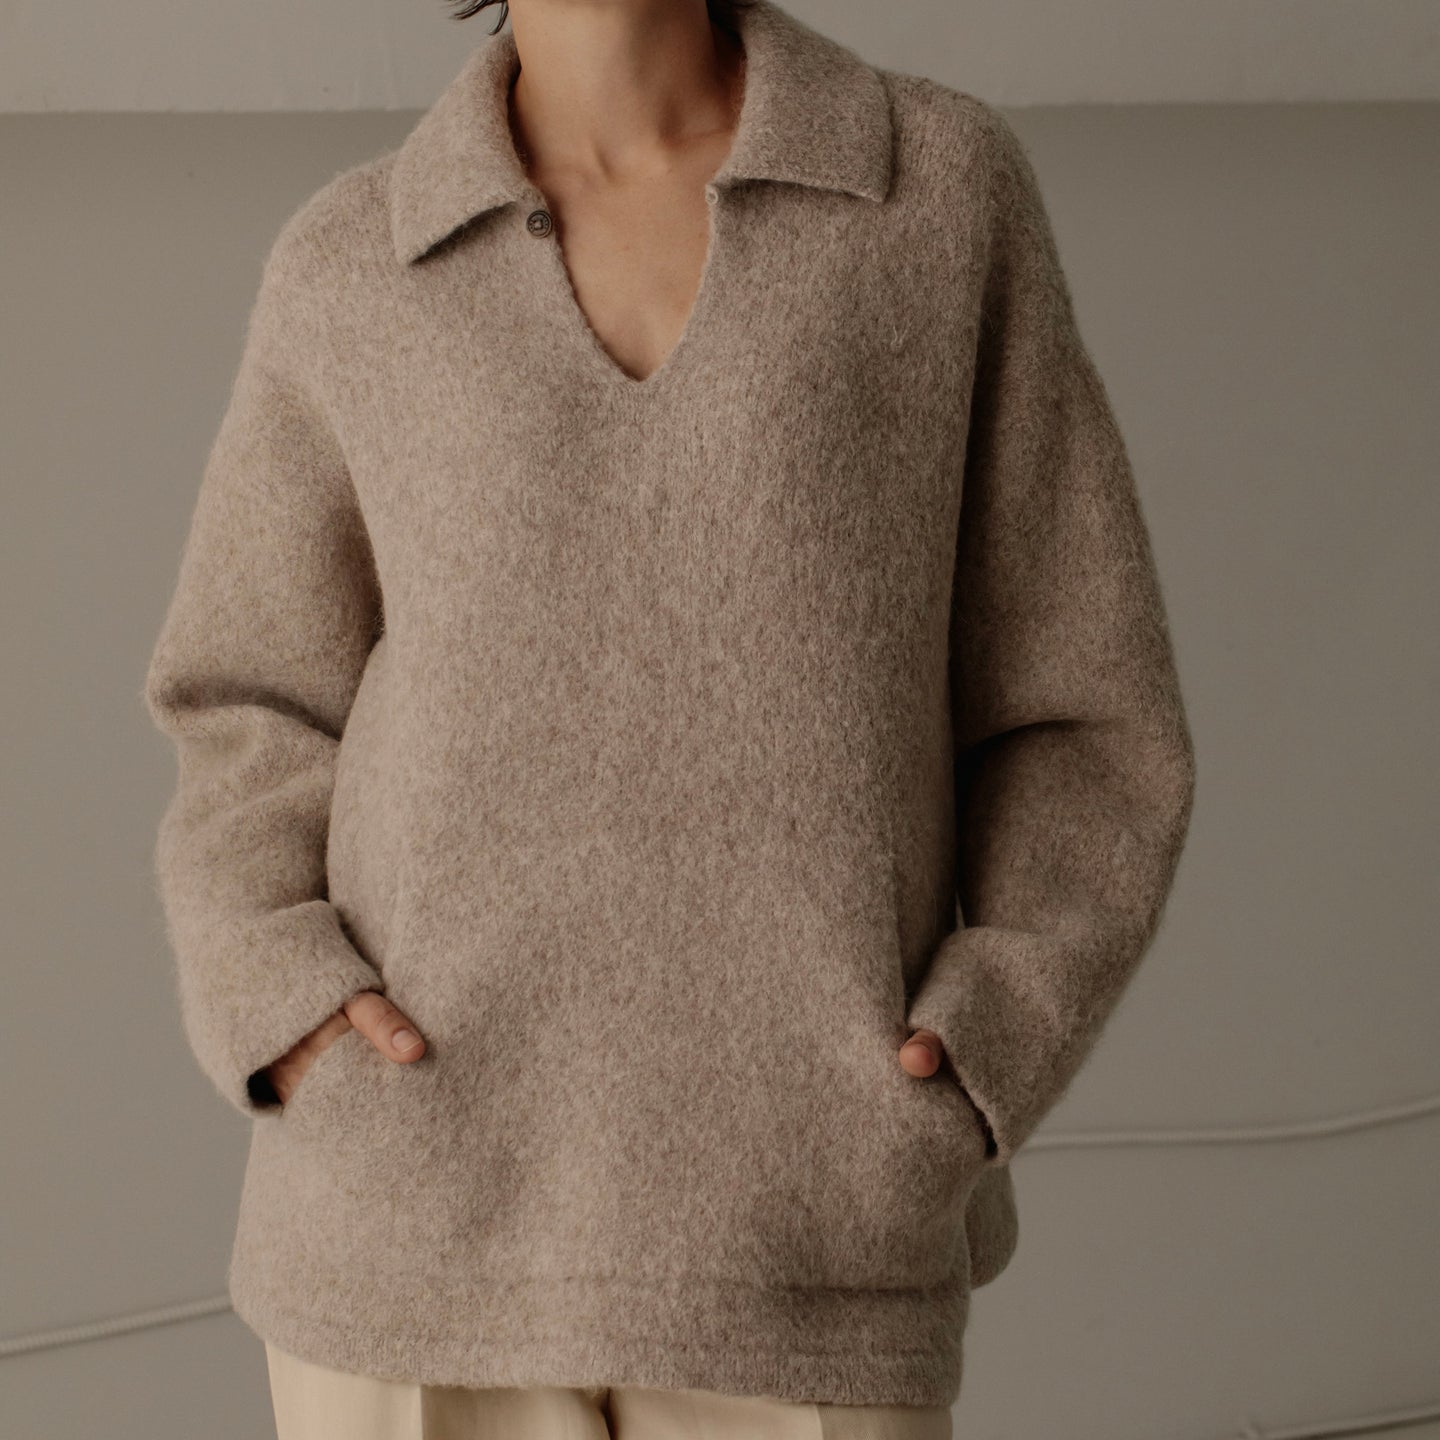 Bare Knitwear Felted Polo - Alpaca/Wool Blend Polo Pullover